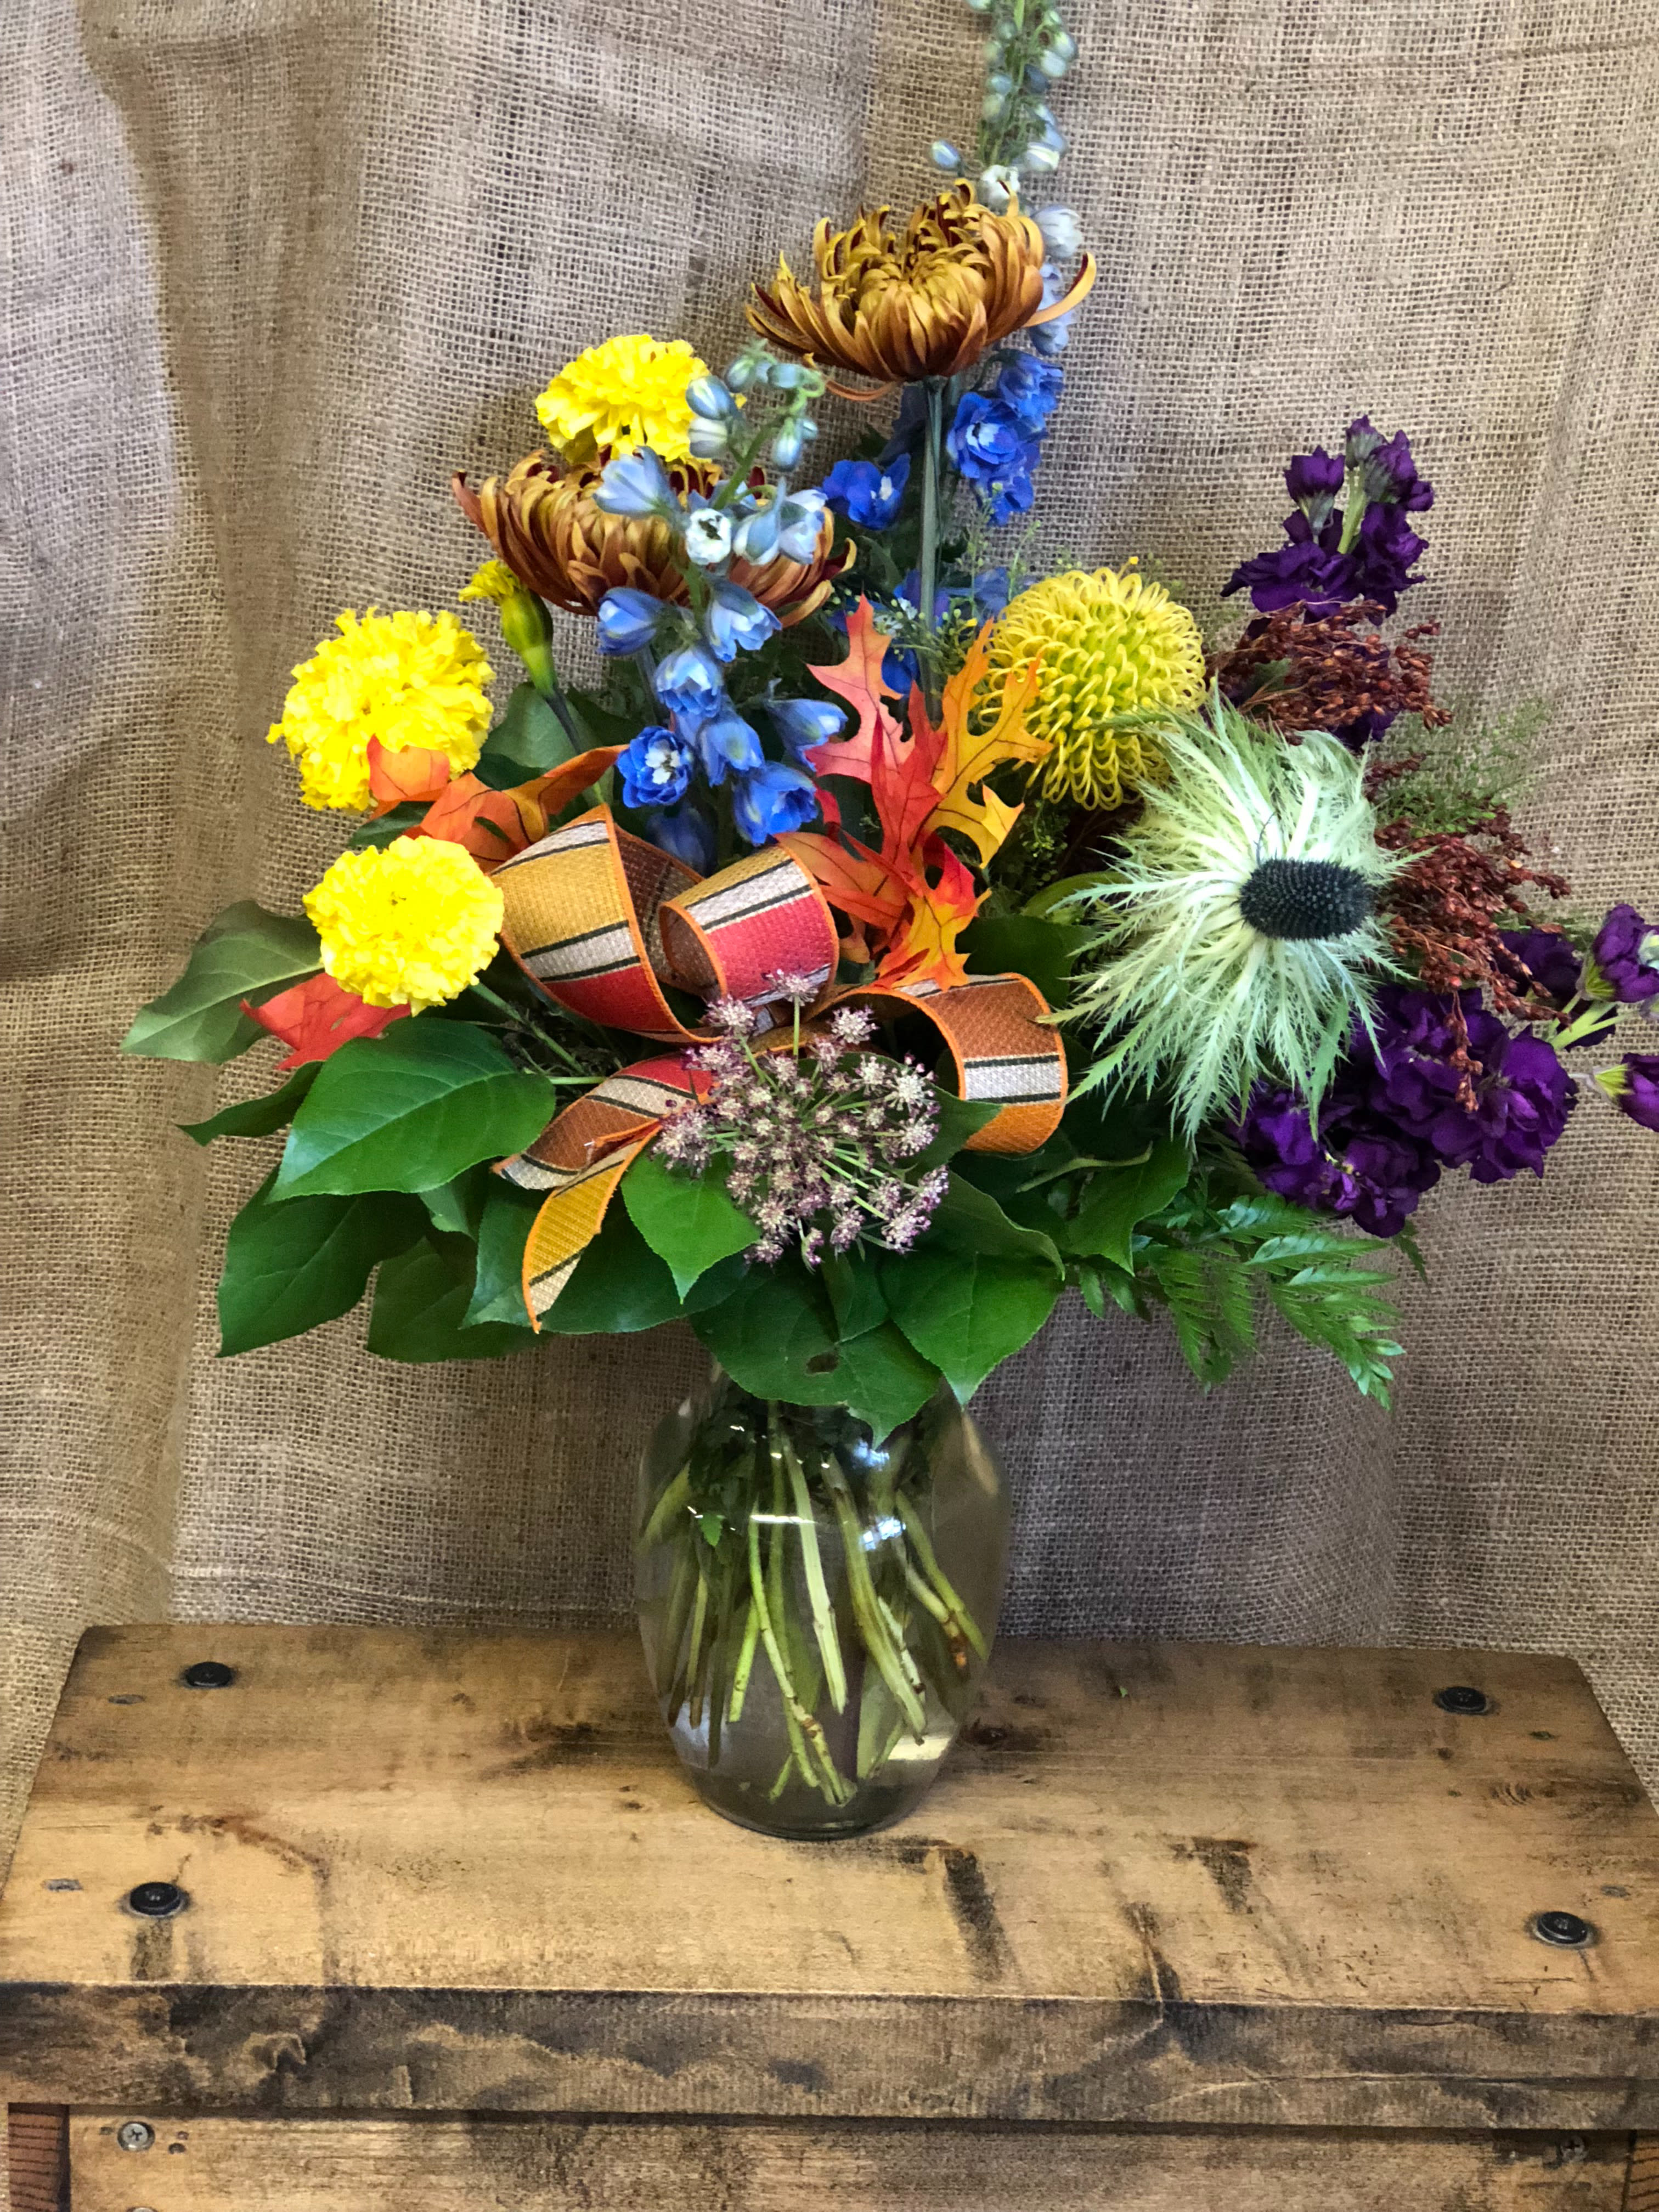 Homegrown - Blooms resembling a freshly picked bouquet from your garden.